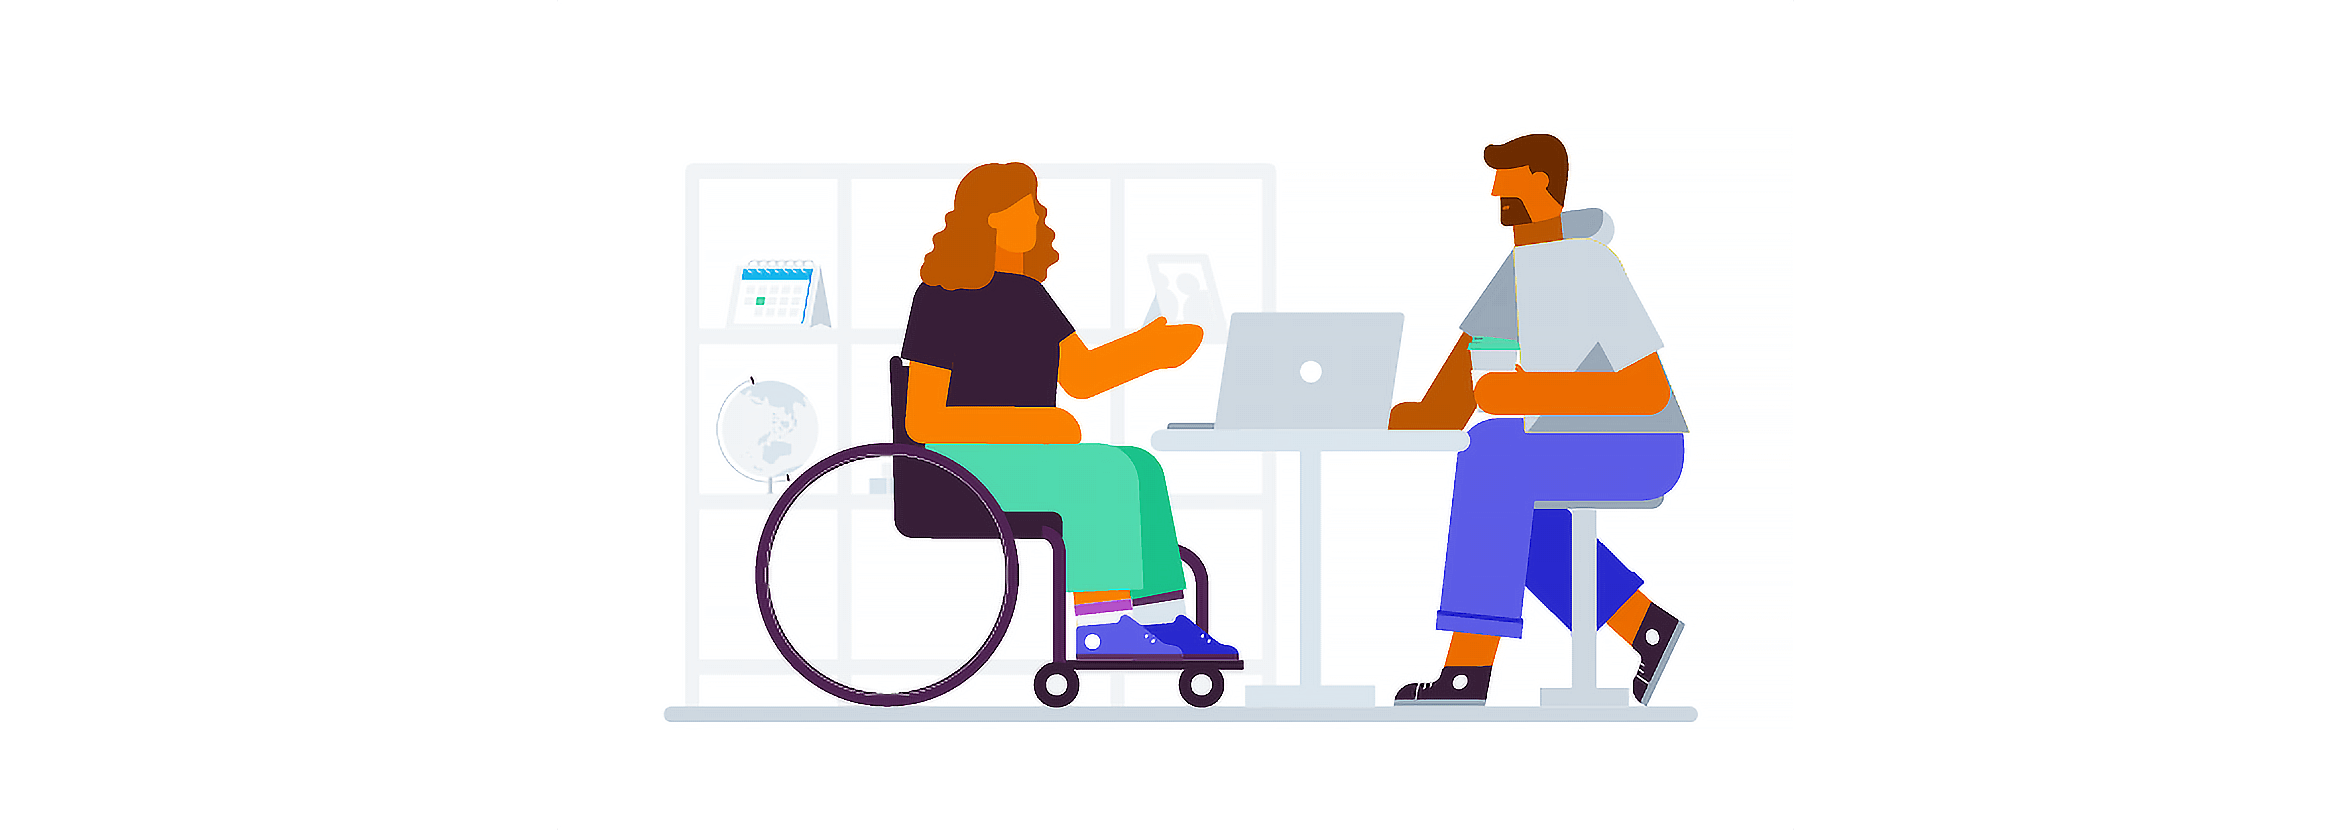 Two Xero employees, one in a wheelchair, with a laptop open in front of them discuss a project.